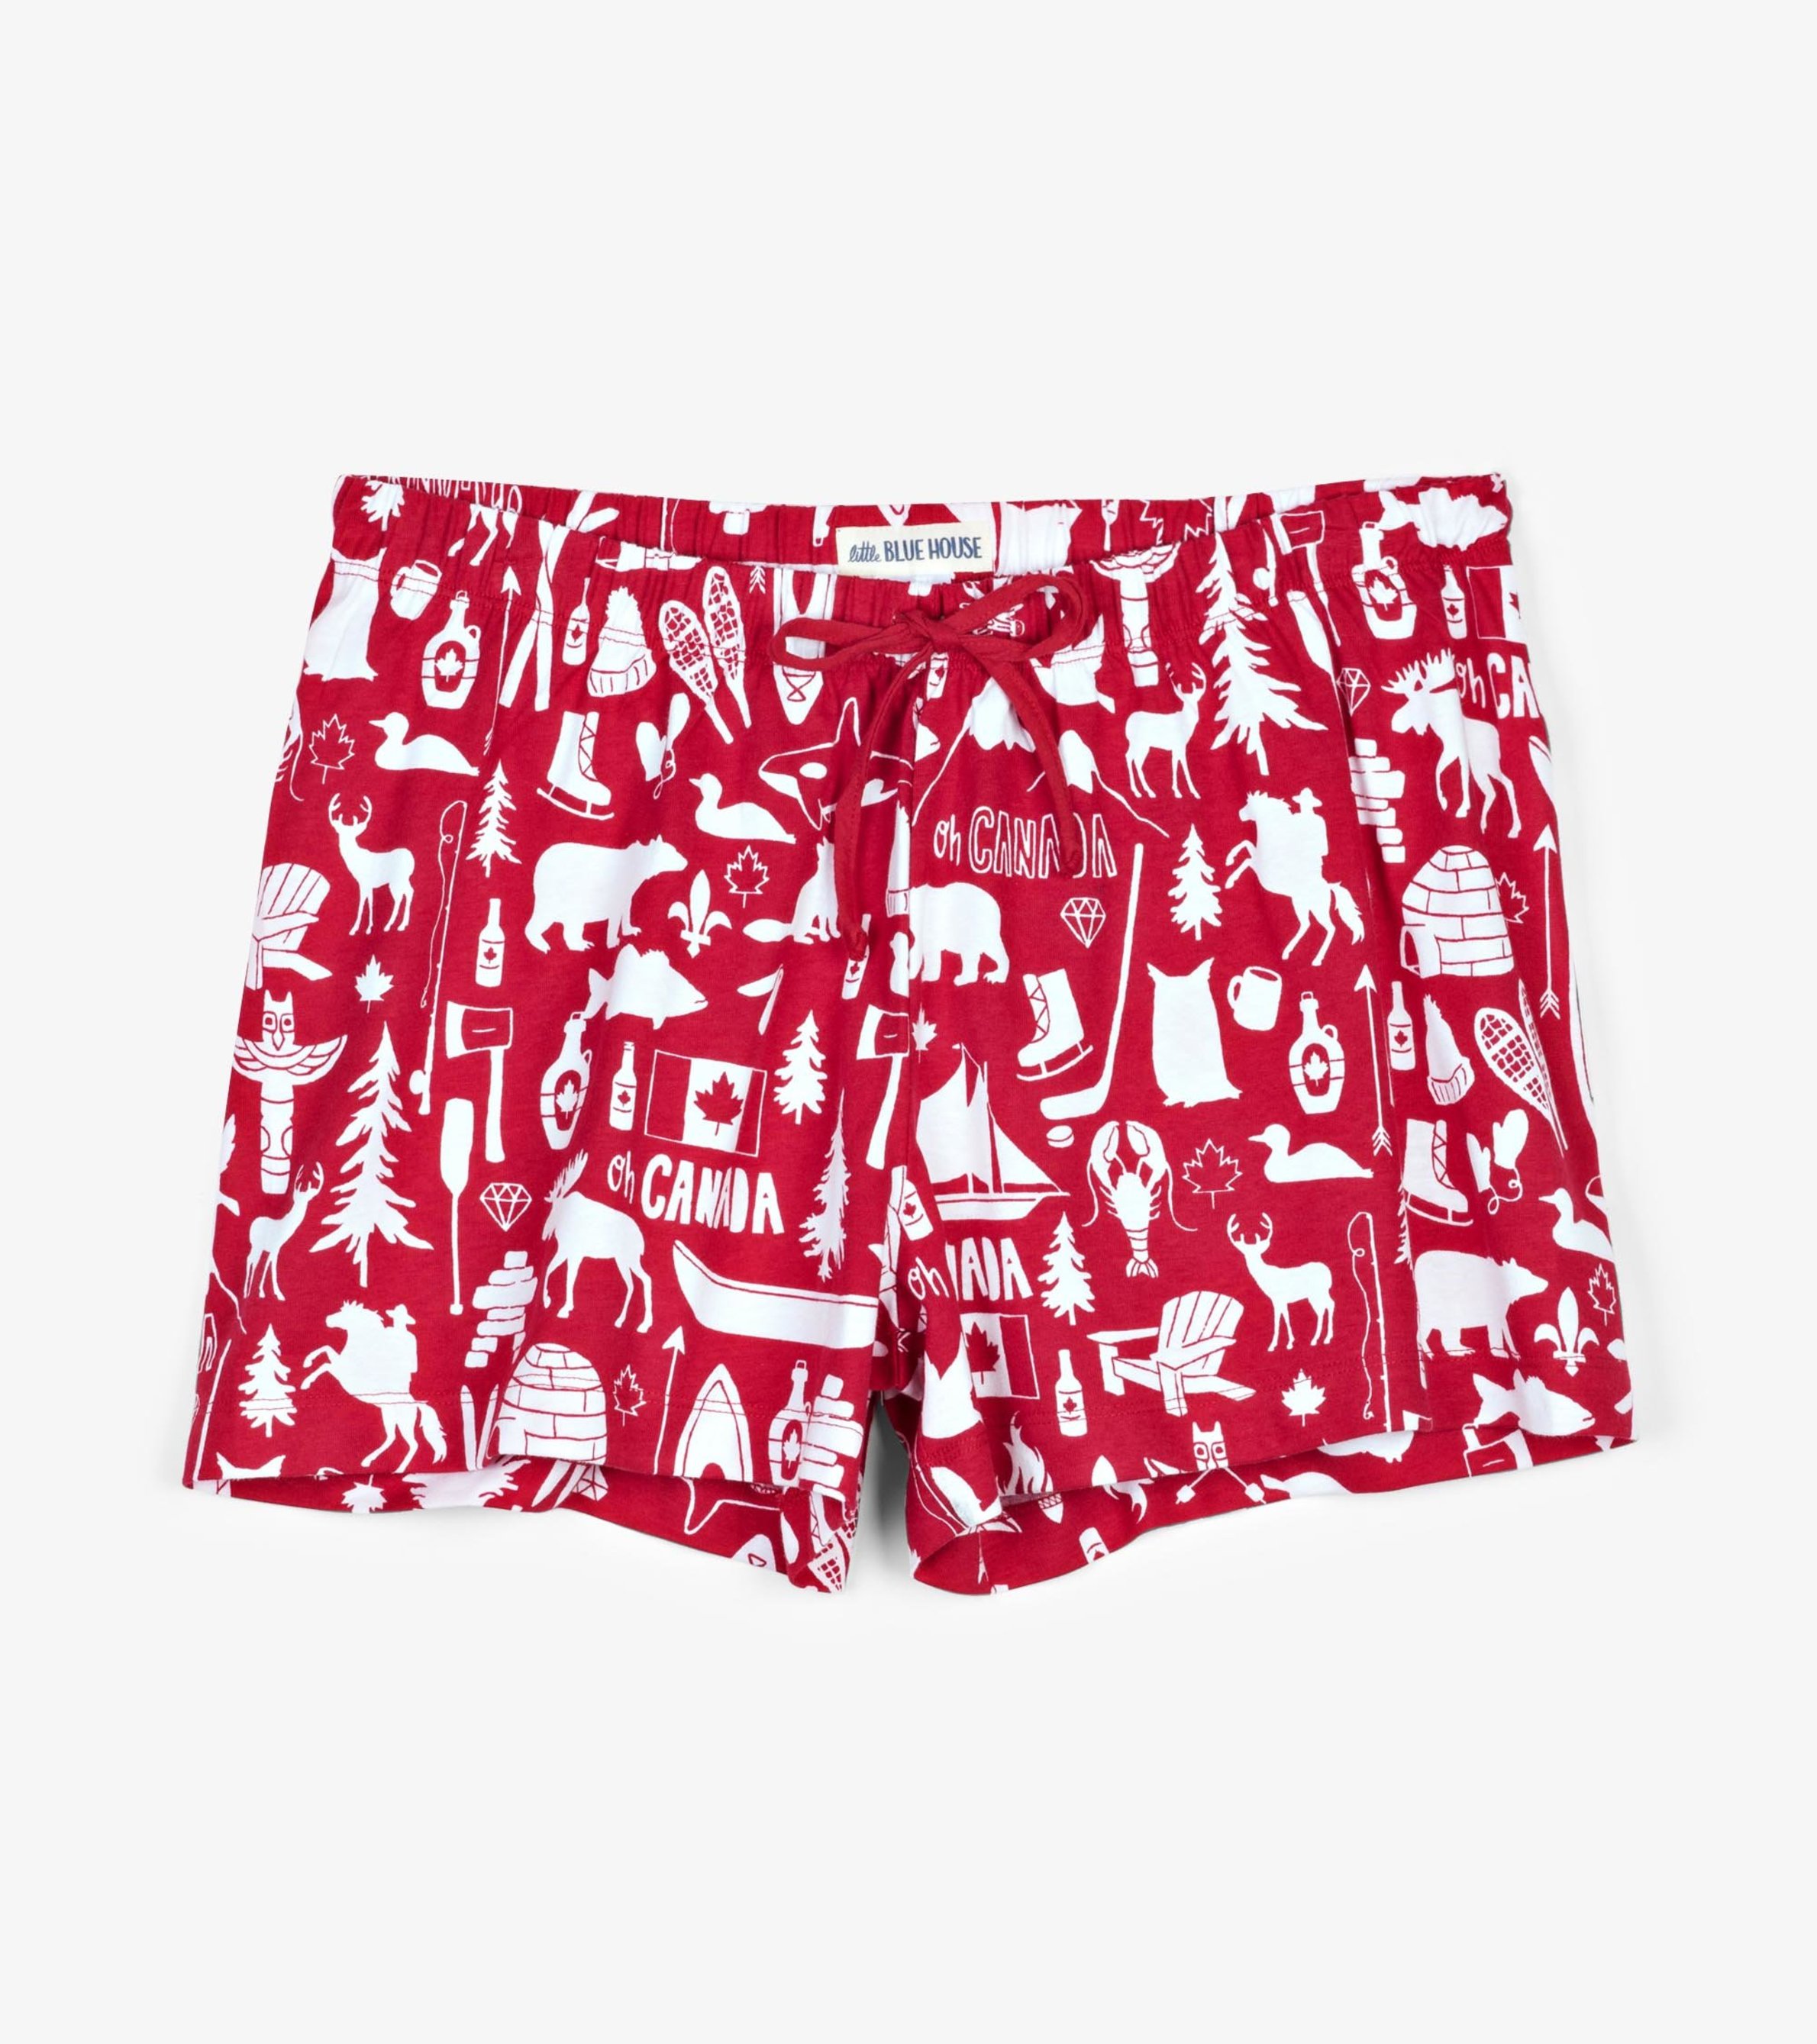 PJ Shorts Are Just Great Shorts, Period